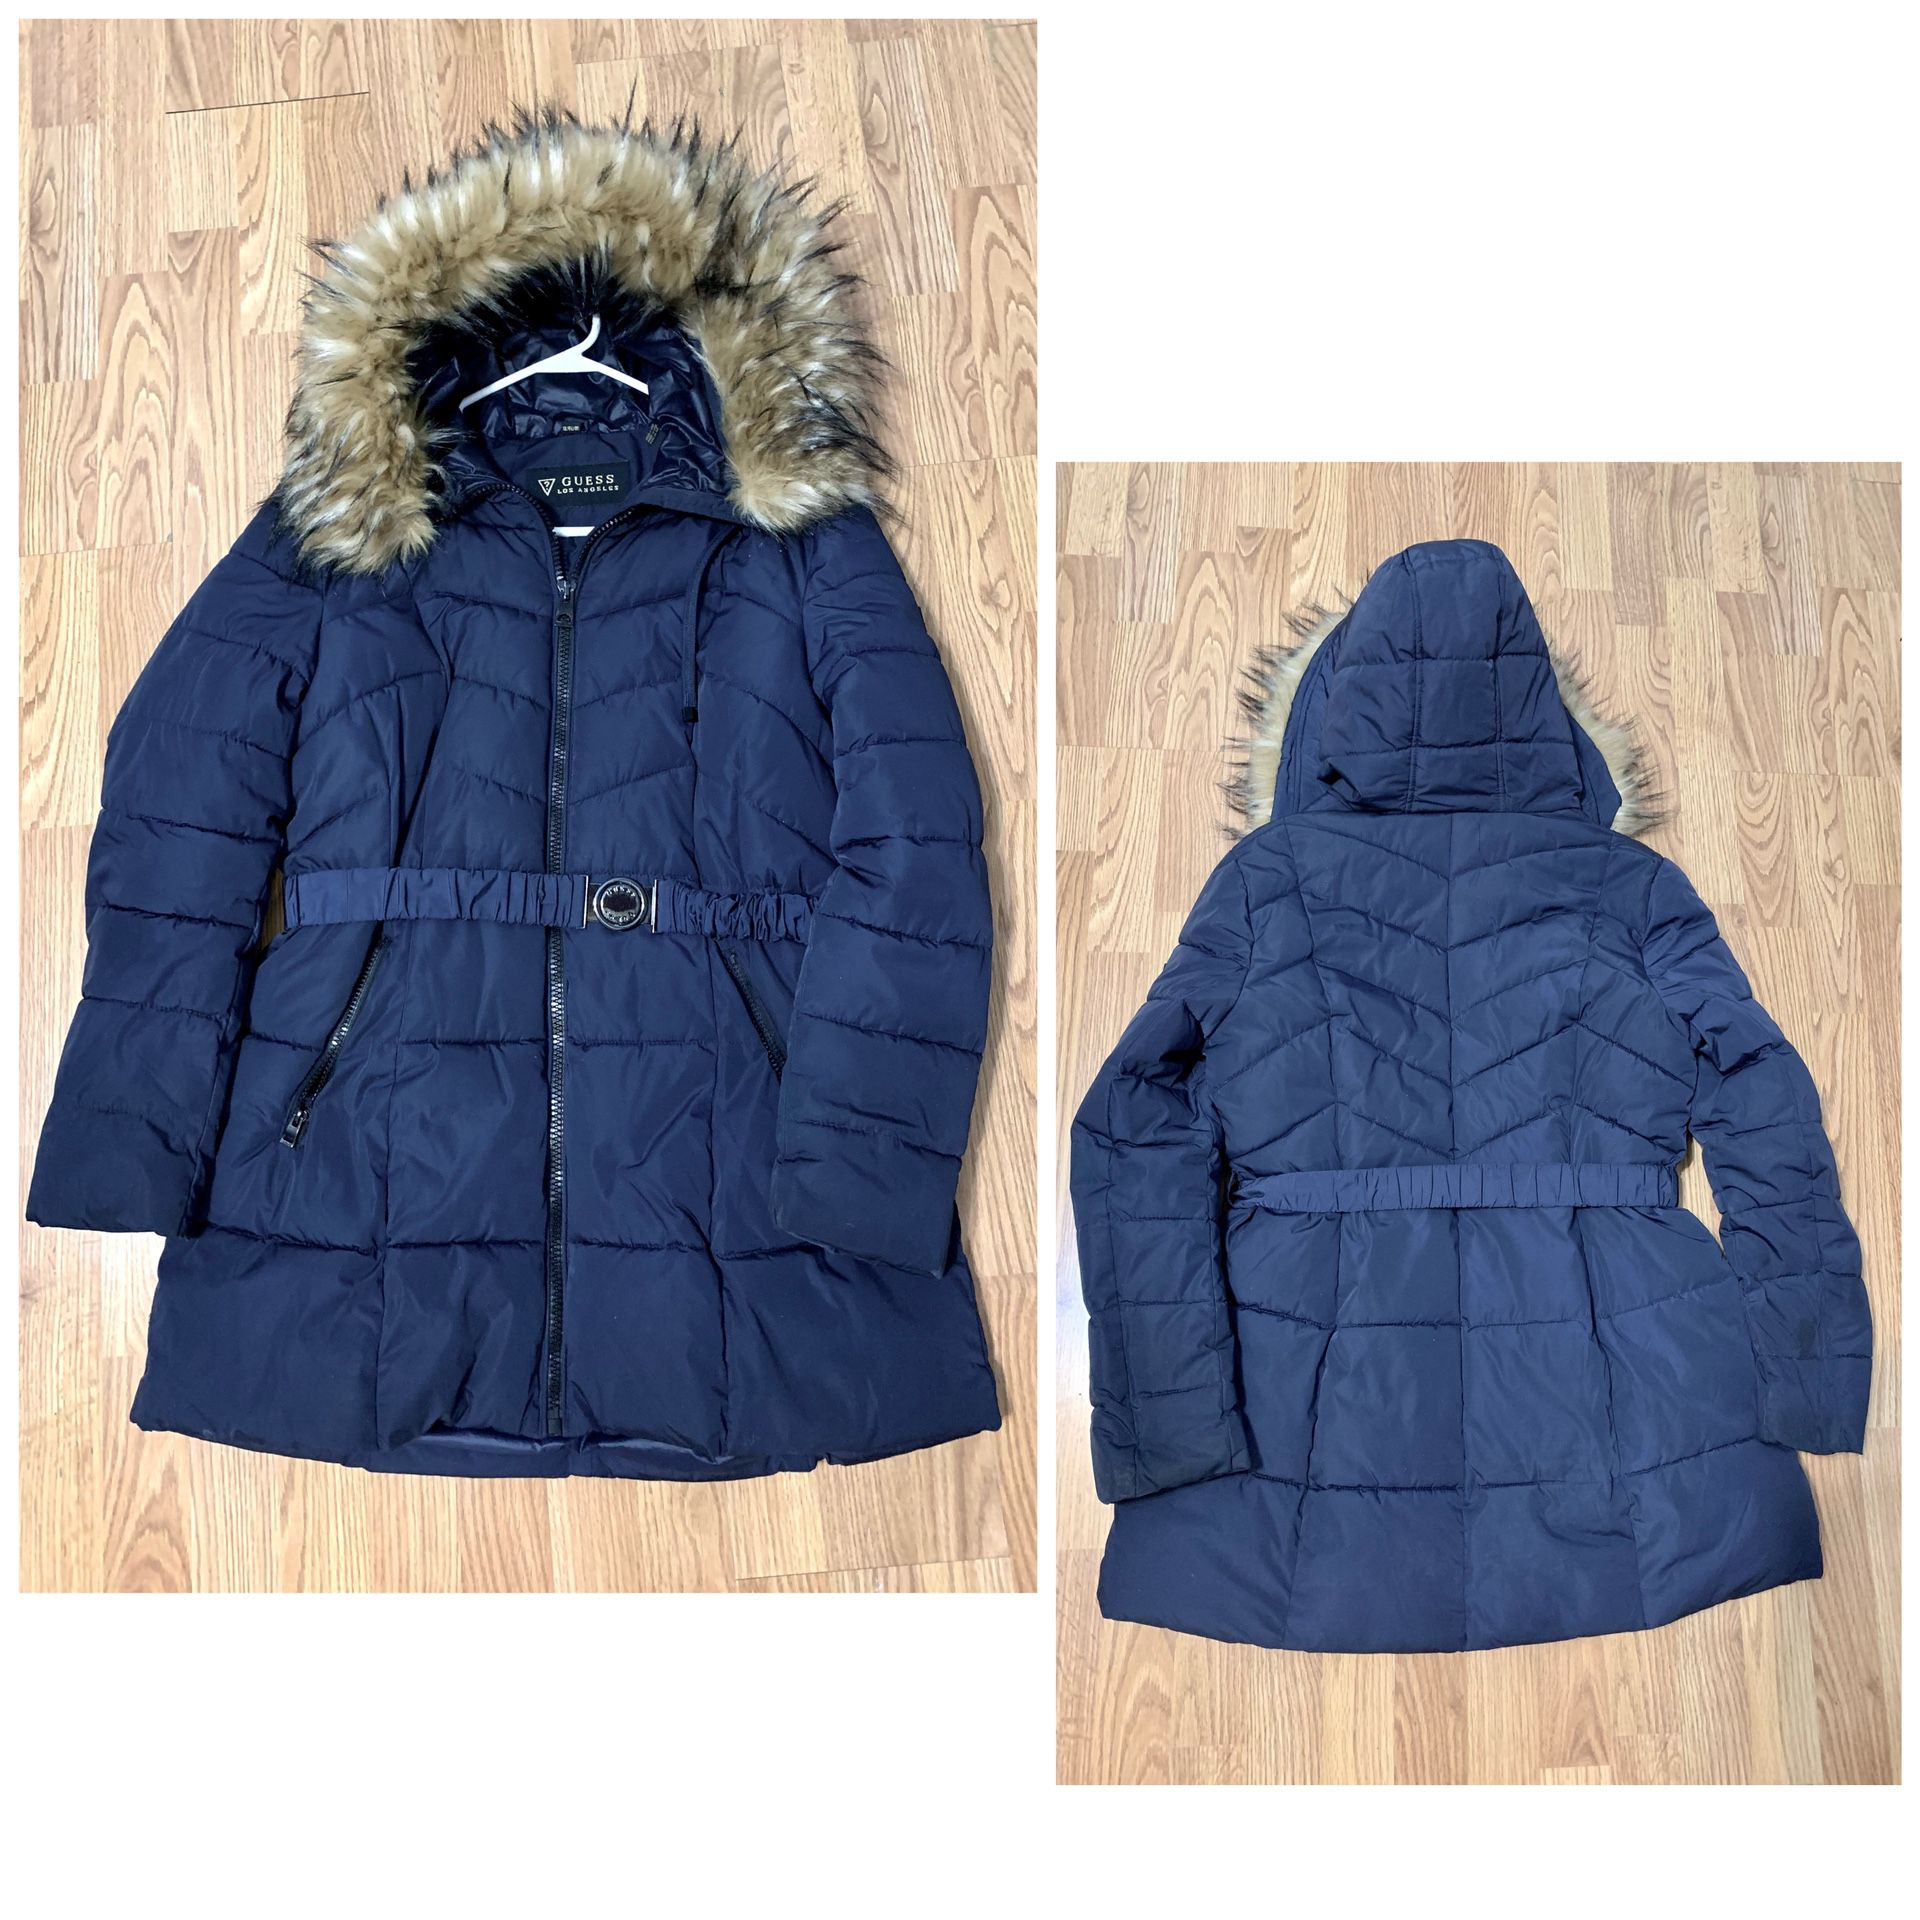 Guess Down Filled parka Fur Hooded puffer coat Blue winter jacket Womens x-large